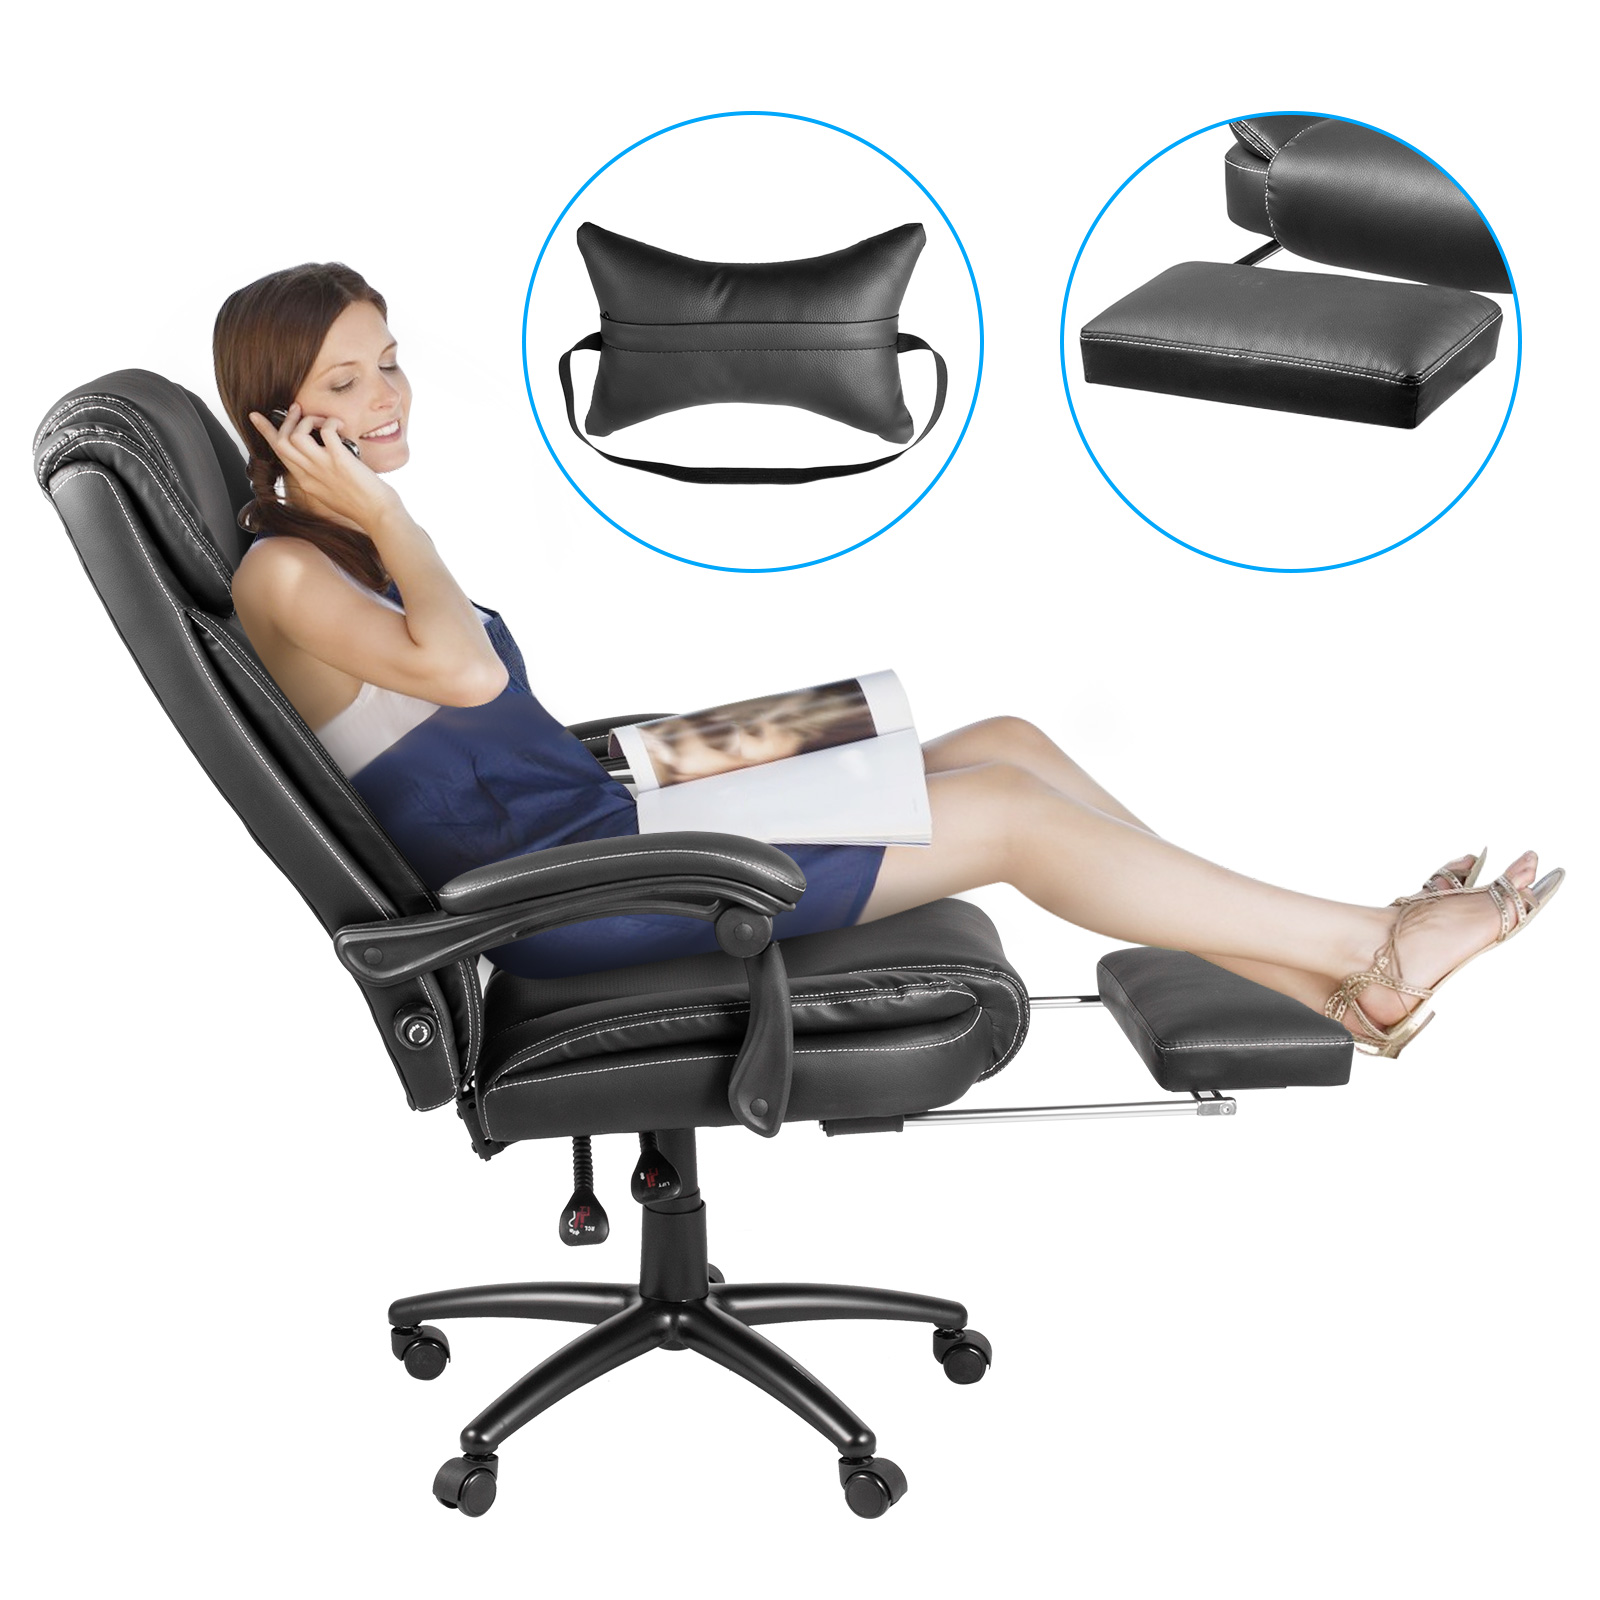 Qulomvs Mesh Ergonomic Office Task Chair with Footrest, Headrest and  Backrest 90-135 Adjustable Computer Executive Home Desk Chair with Wheels  360